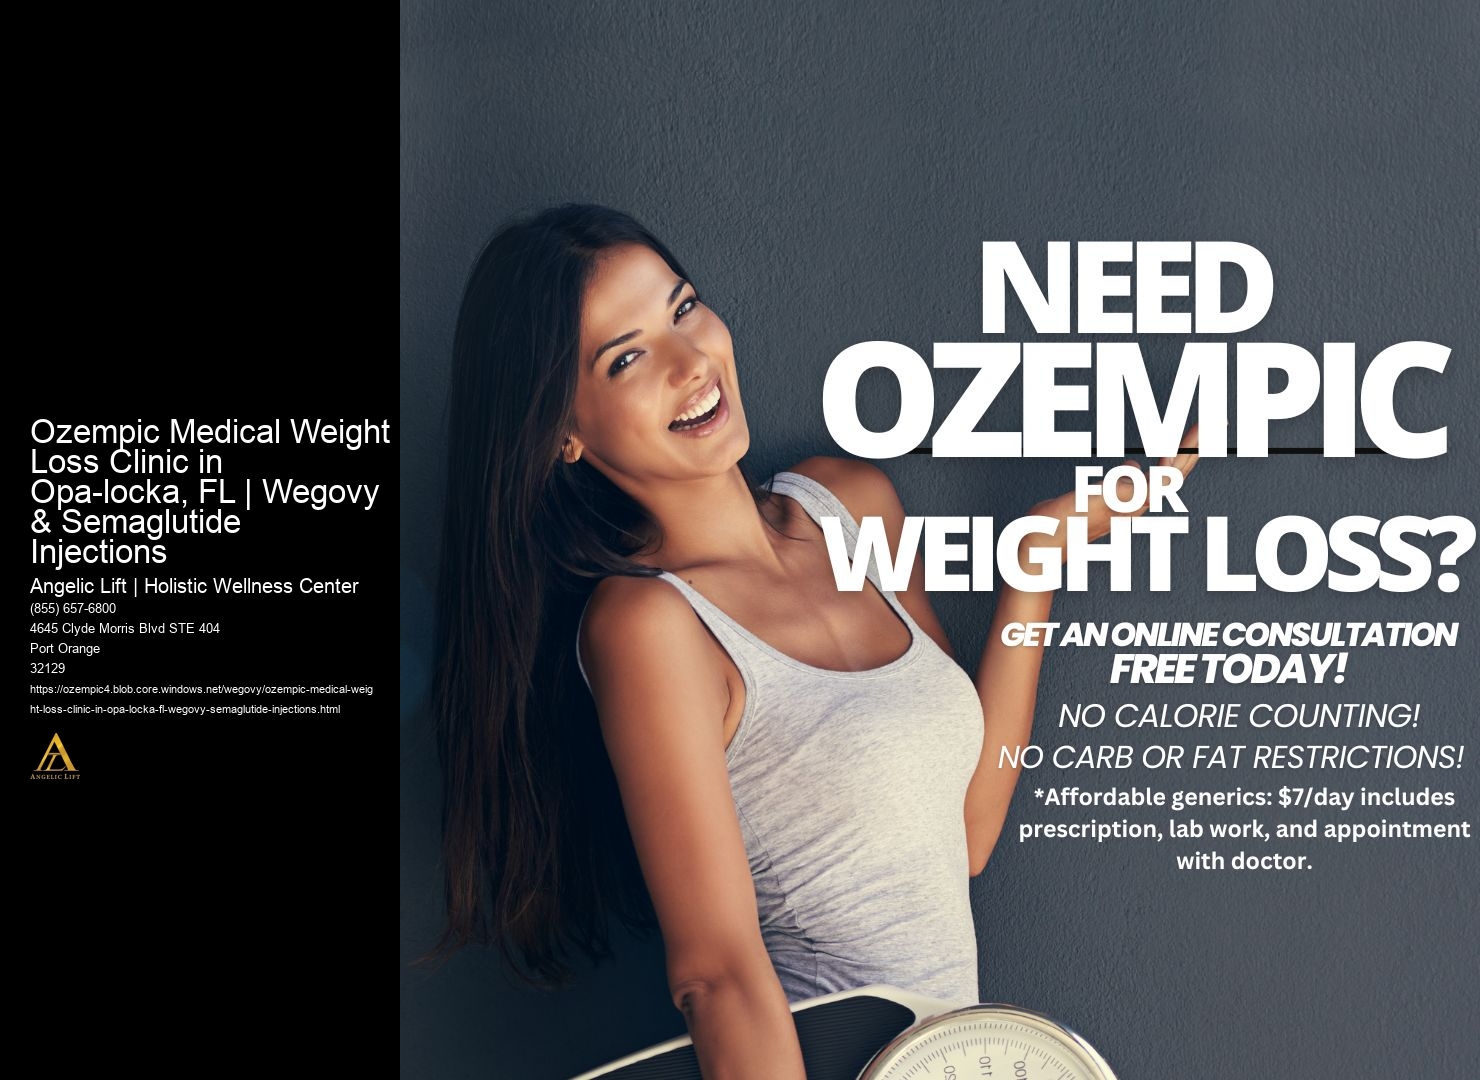 Ozempic Medical Weight Loss Clinic in Opa-locka, FL | Wegovy & Semaglutide Injections